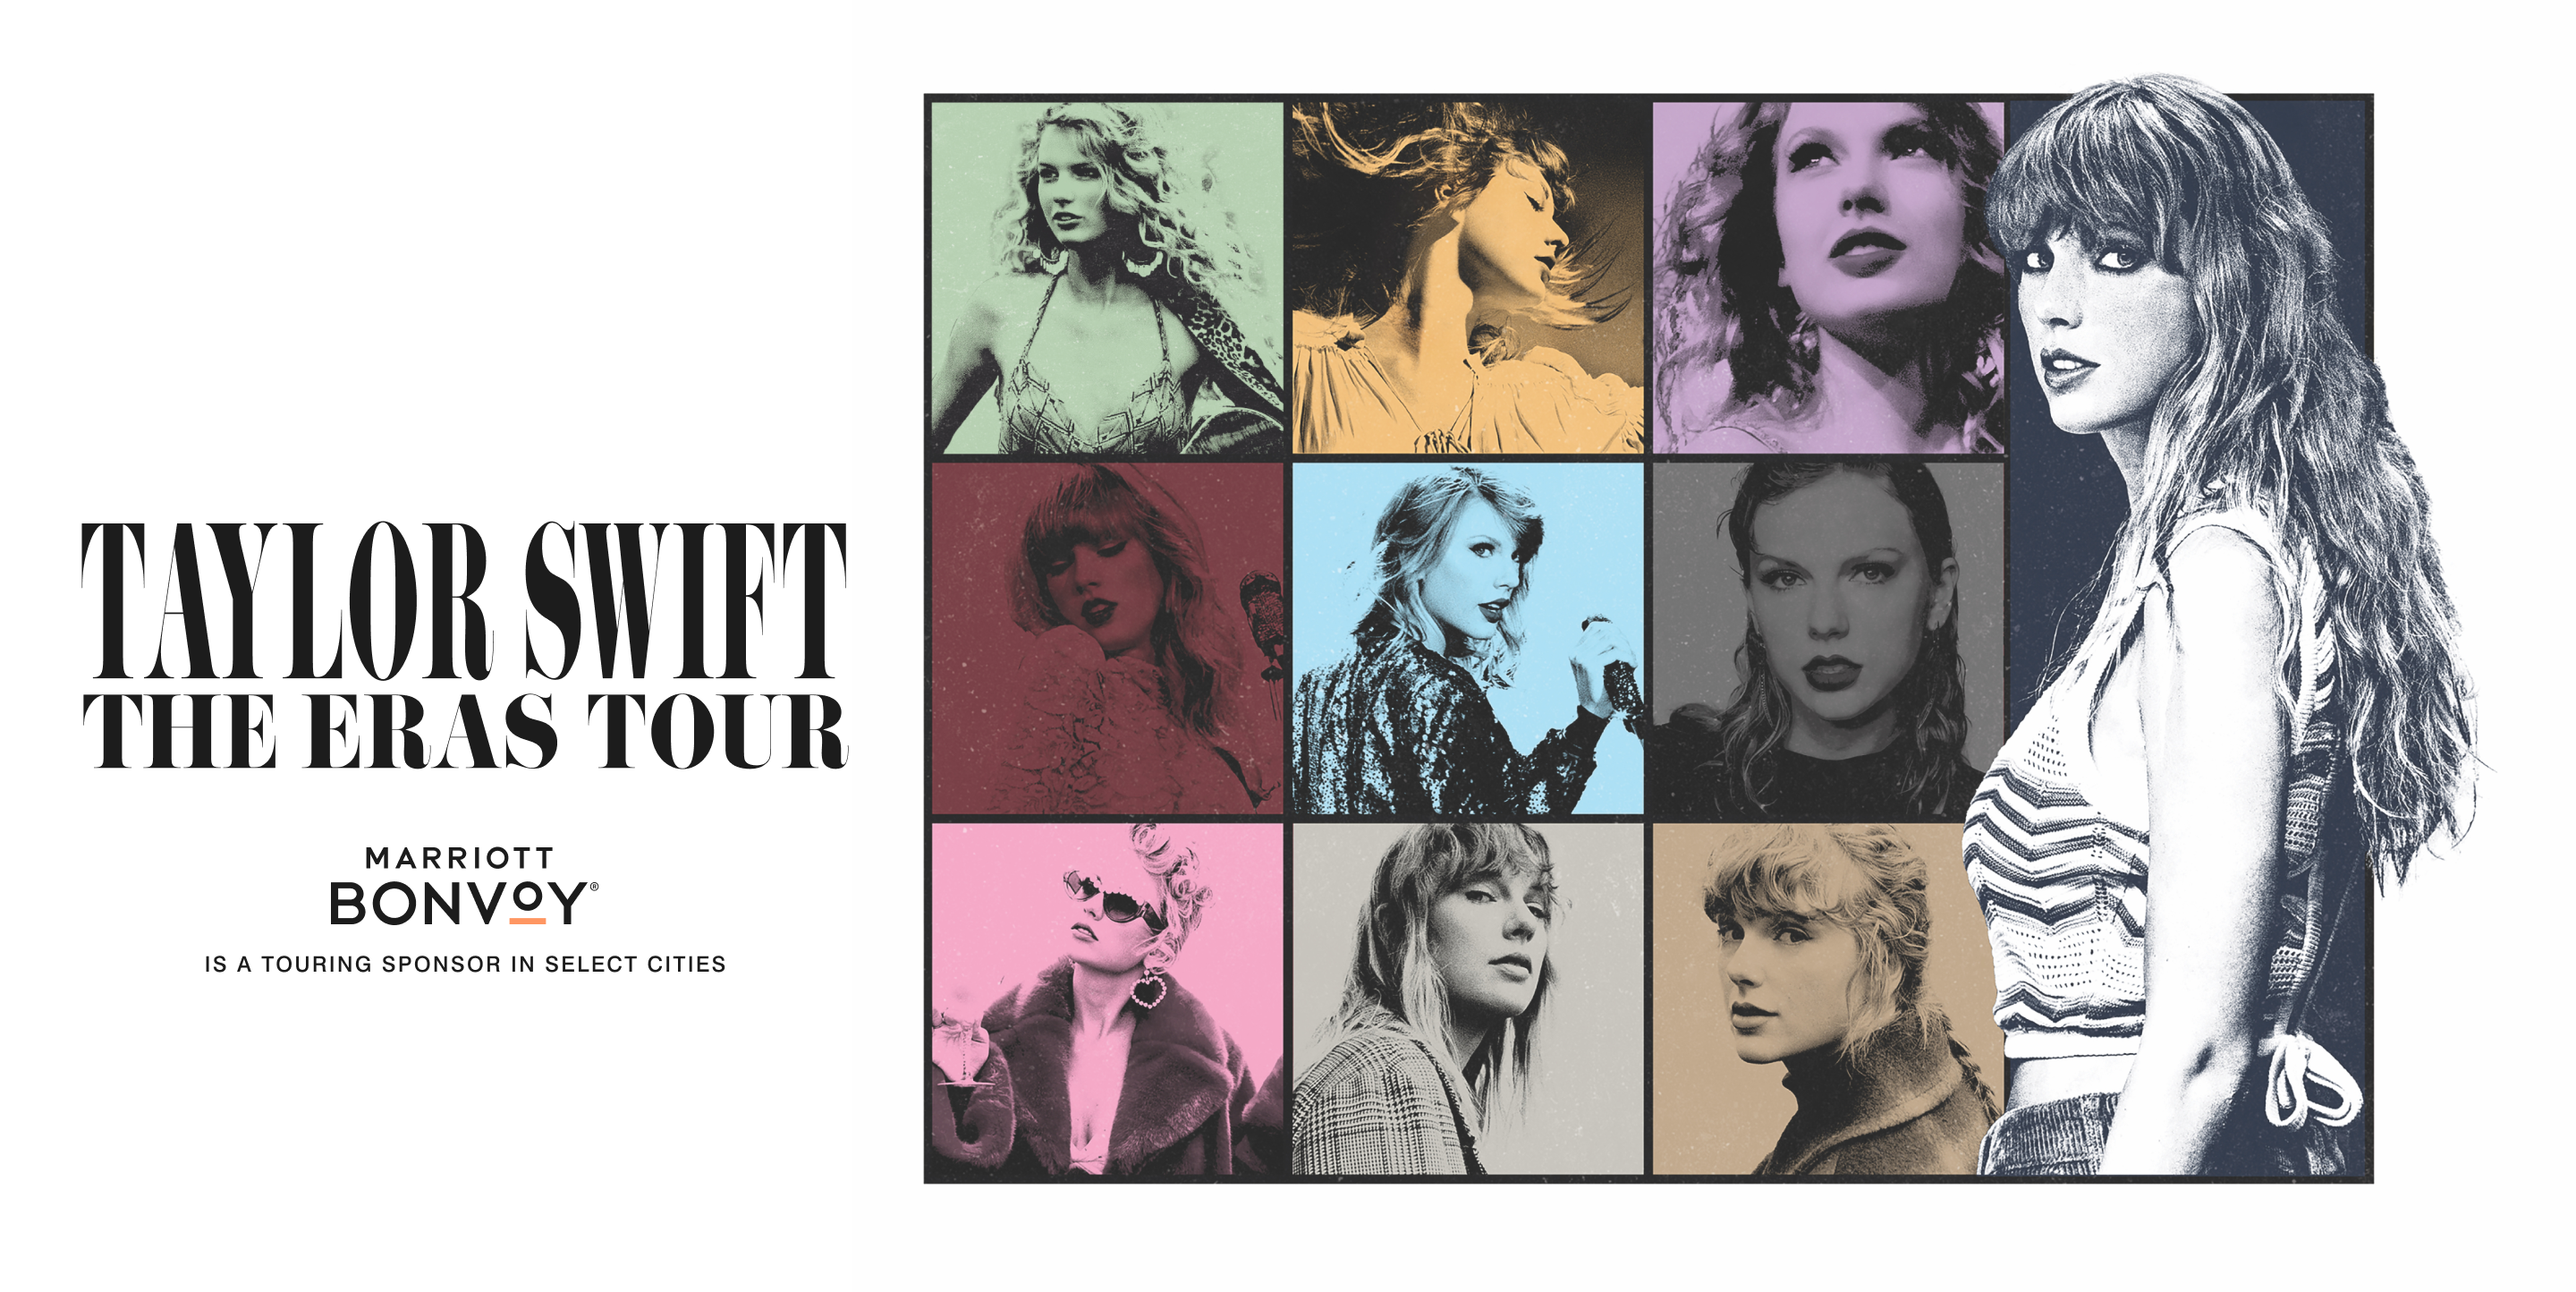 Taylor Swift the Eras Tour. Marriott Bonvoy is a touring sponsor in select cities.